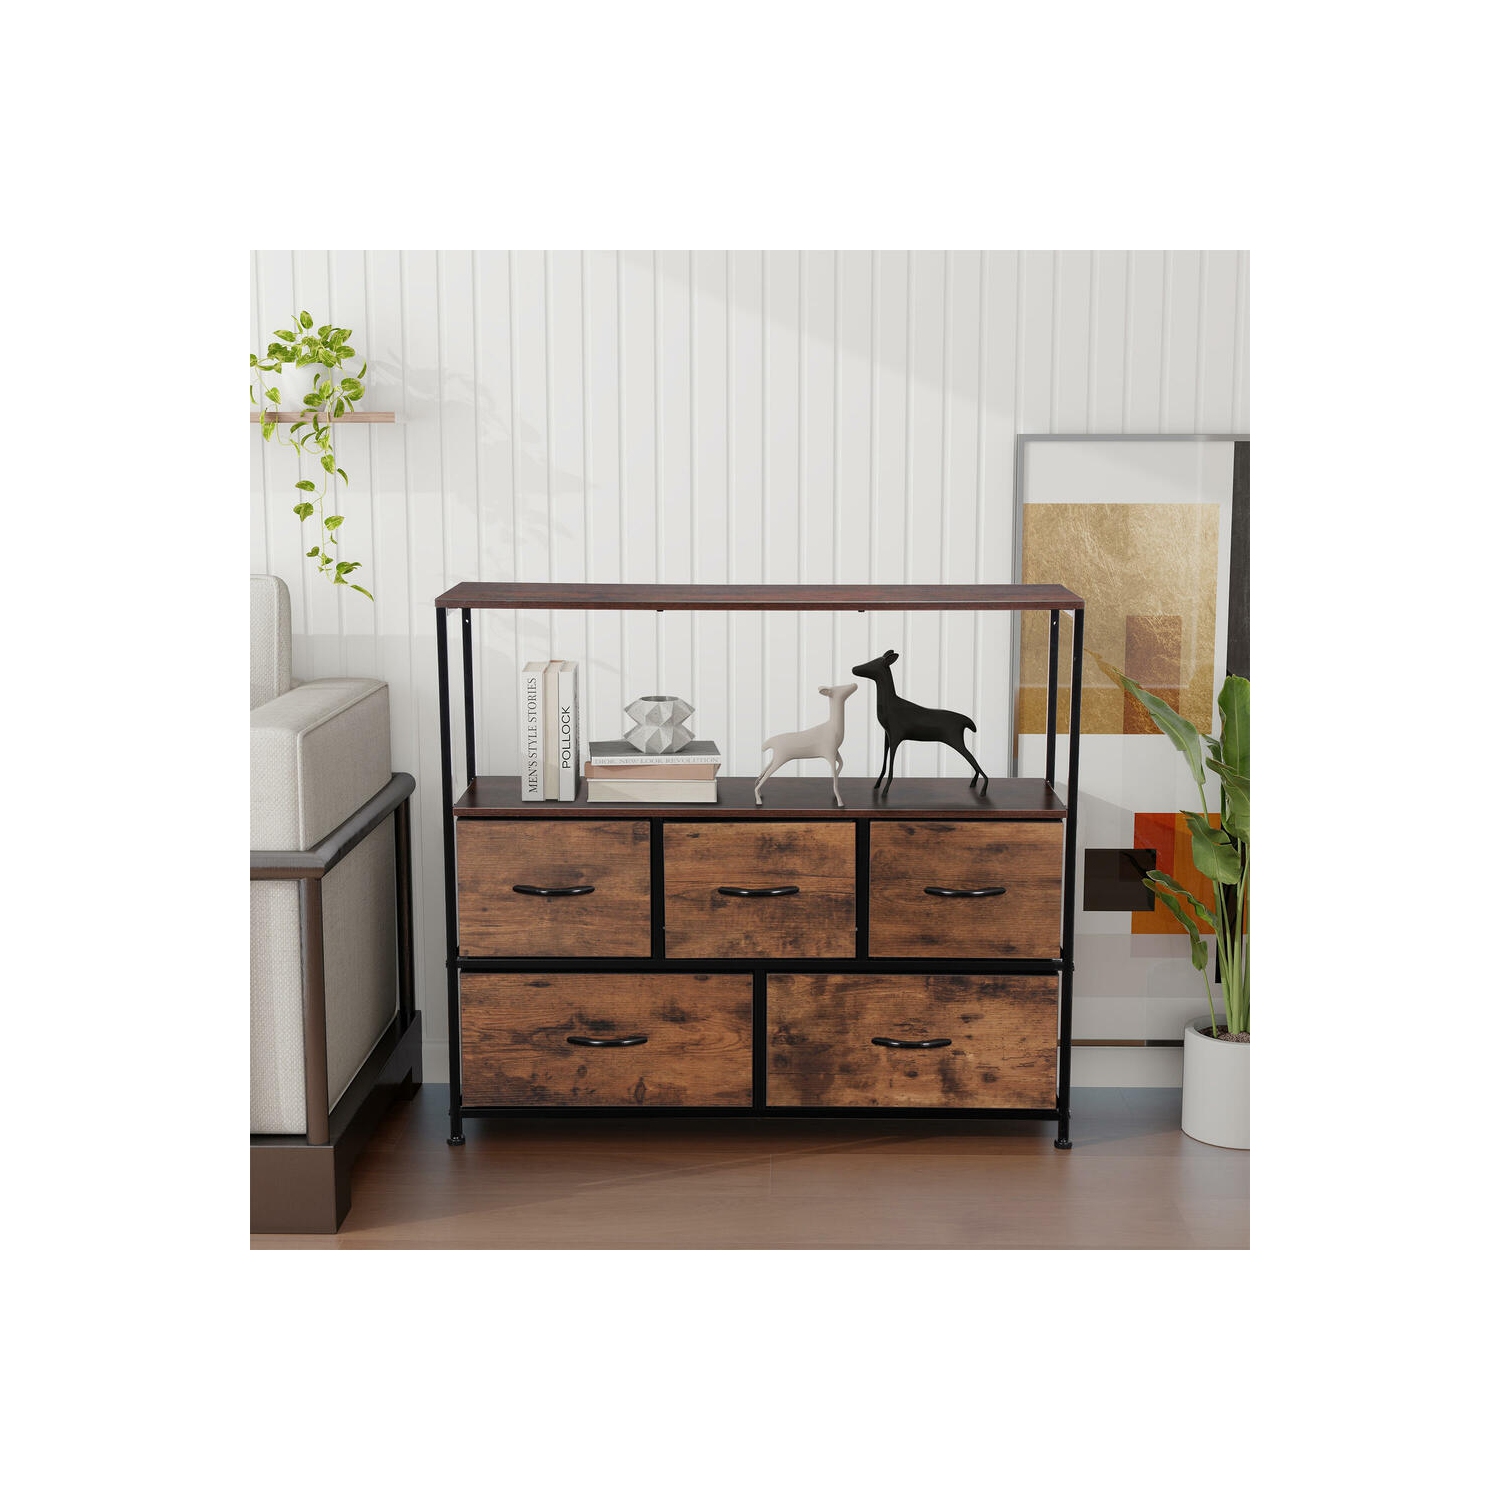 WEIYUDANG Grantville Farmhouse 5 - Drawers Dresser Organizer, Rustic Tall  Chest of Drawers for Bedroom & Reviews